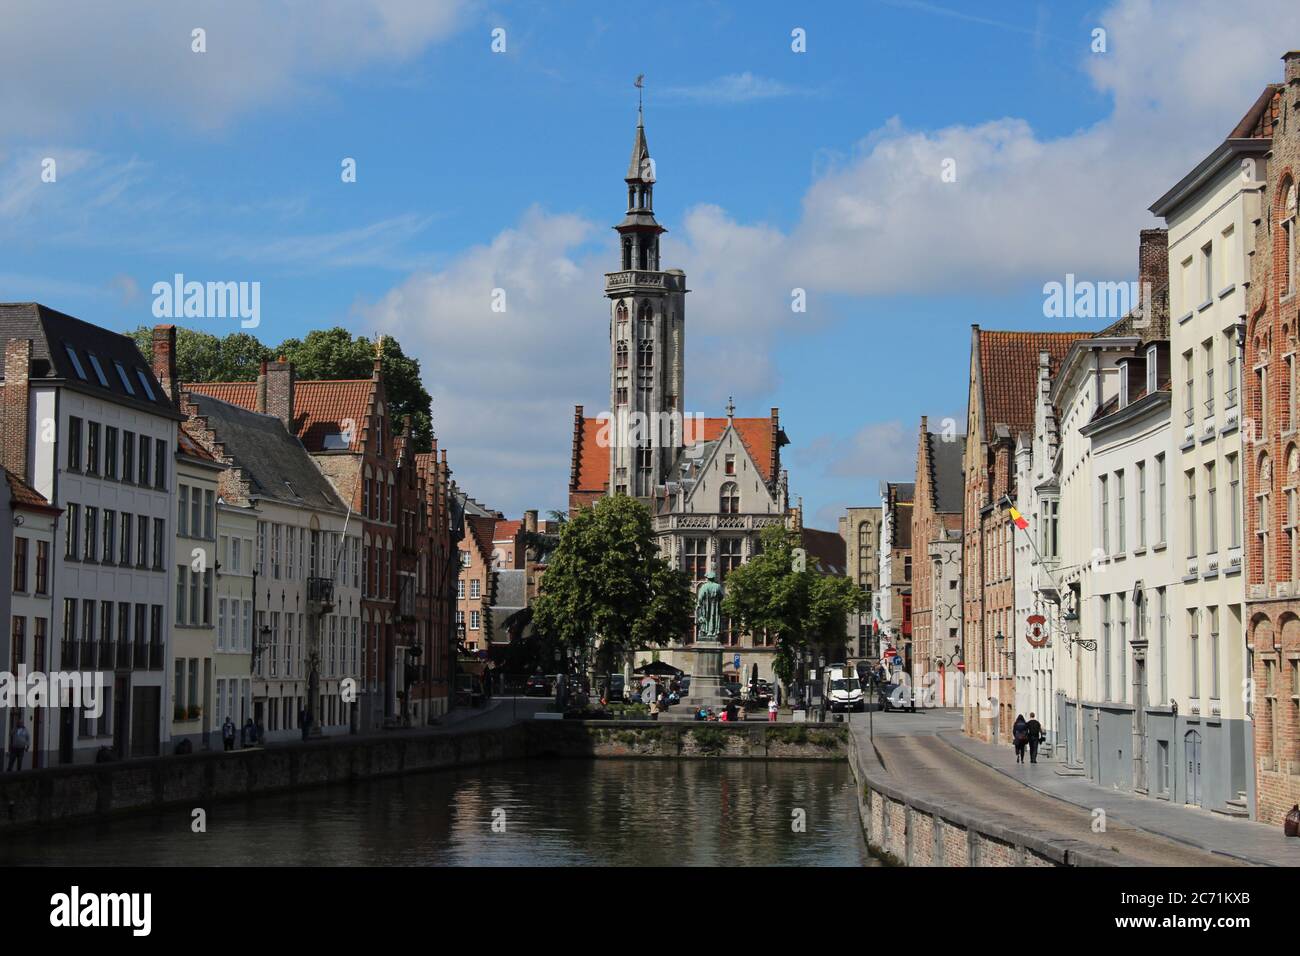 Poortersloge, Bruges, Belgium, as seen from the Bridge over the Spiegelrei Canal in Summer 2019: Bruges was a centre of early capitalism. Stock Photo